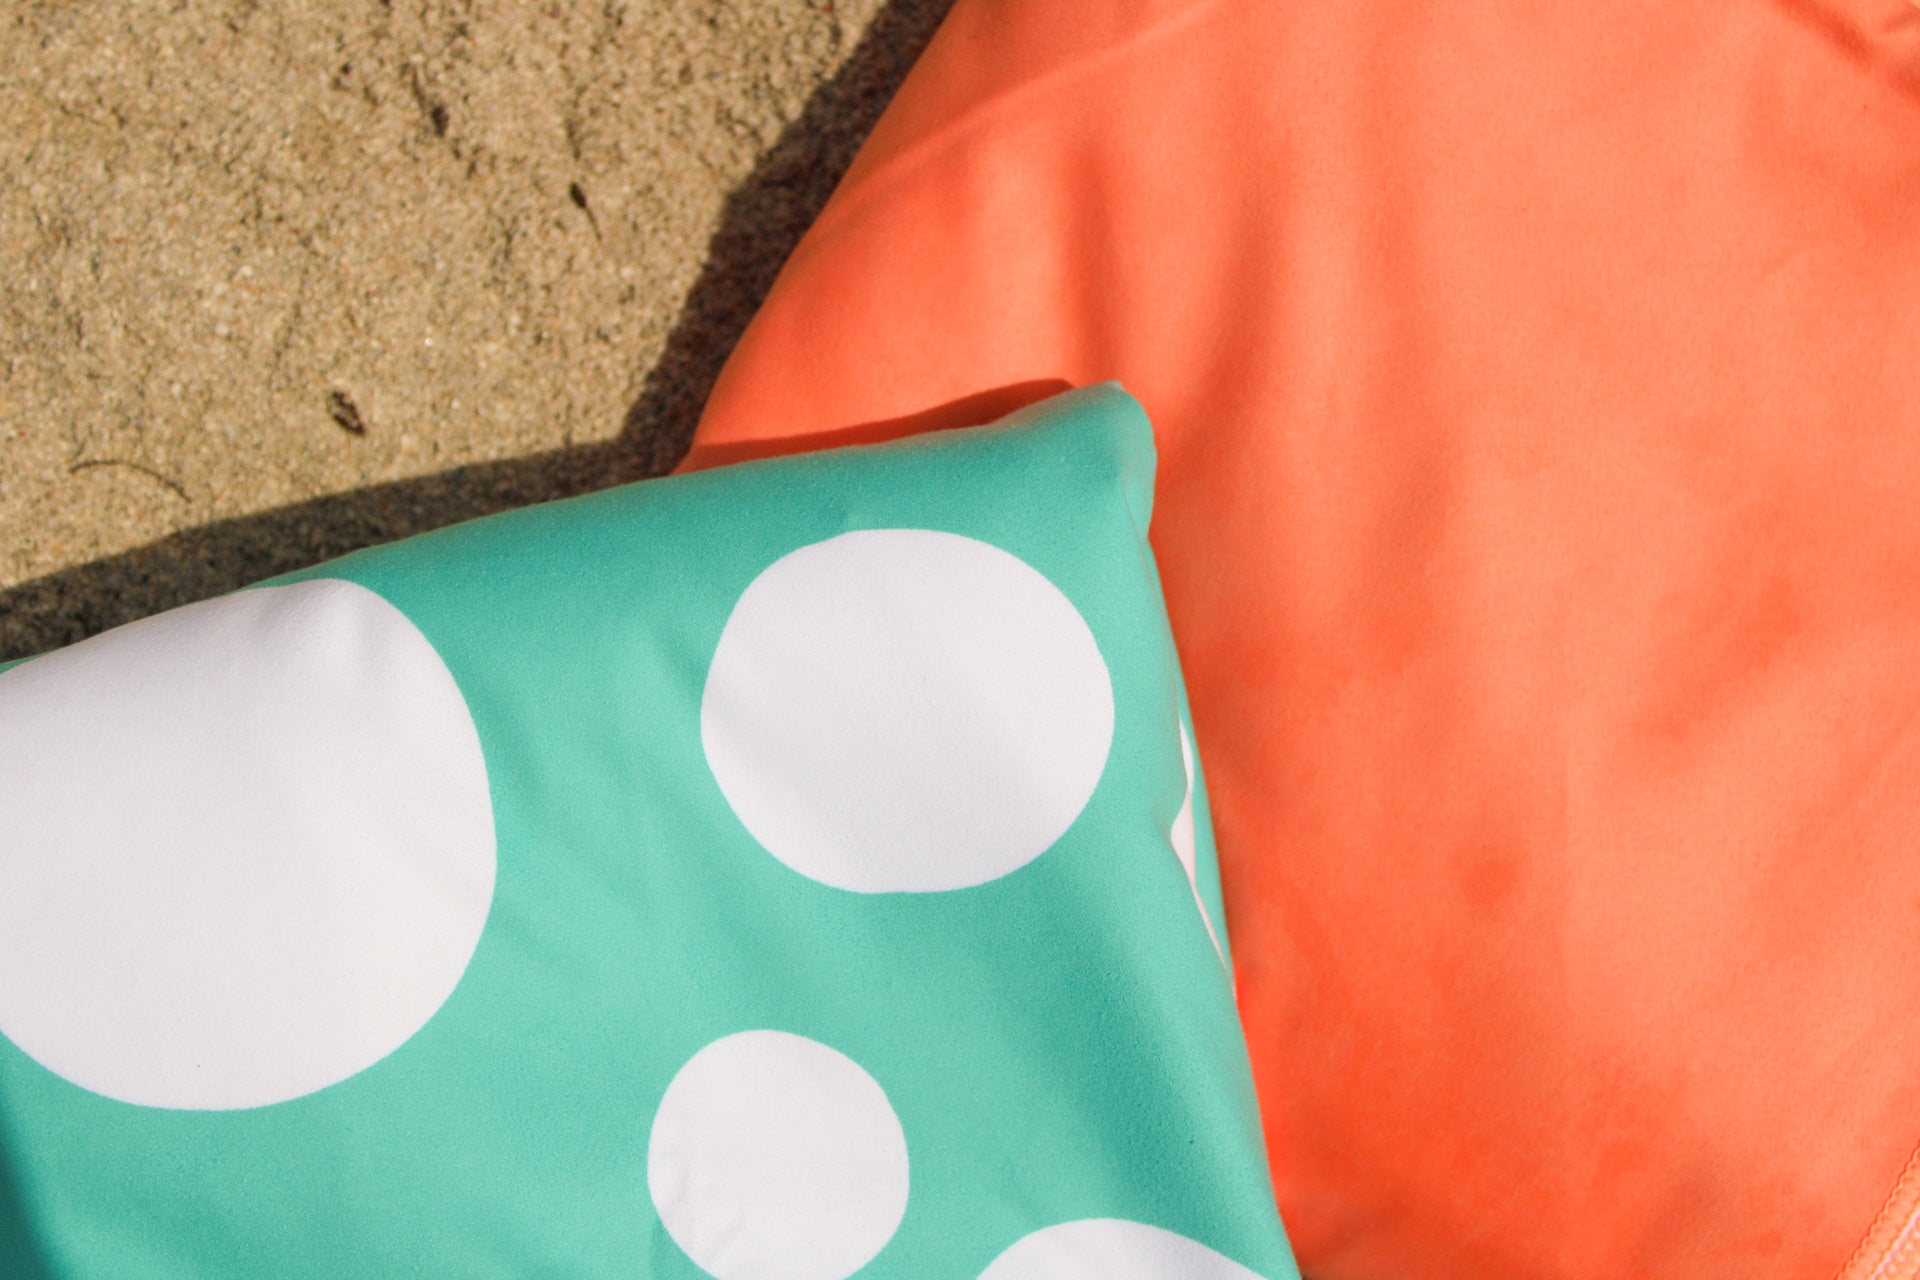 The Handy Beach Mat is made with recycled plastic material yet doesn't compromise on comfort